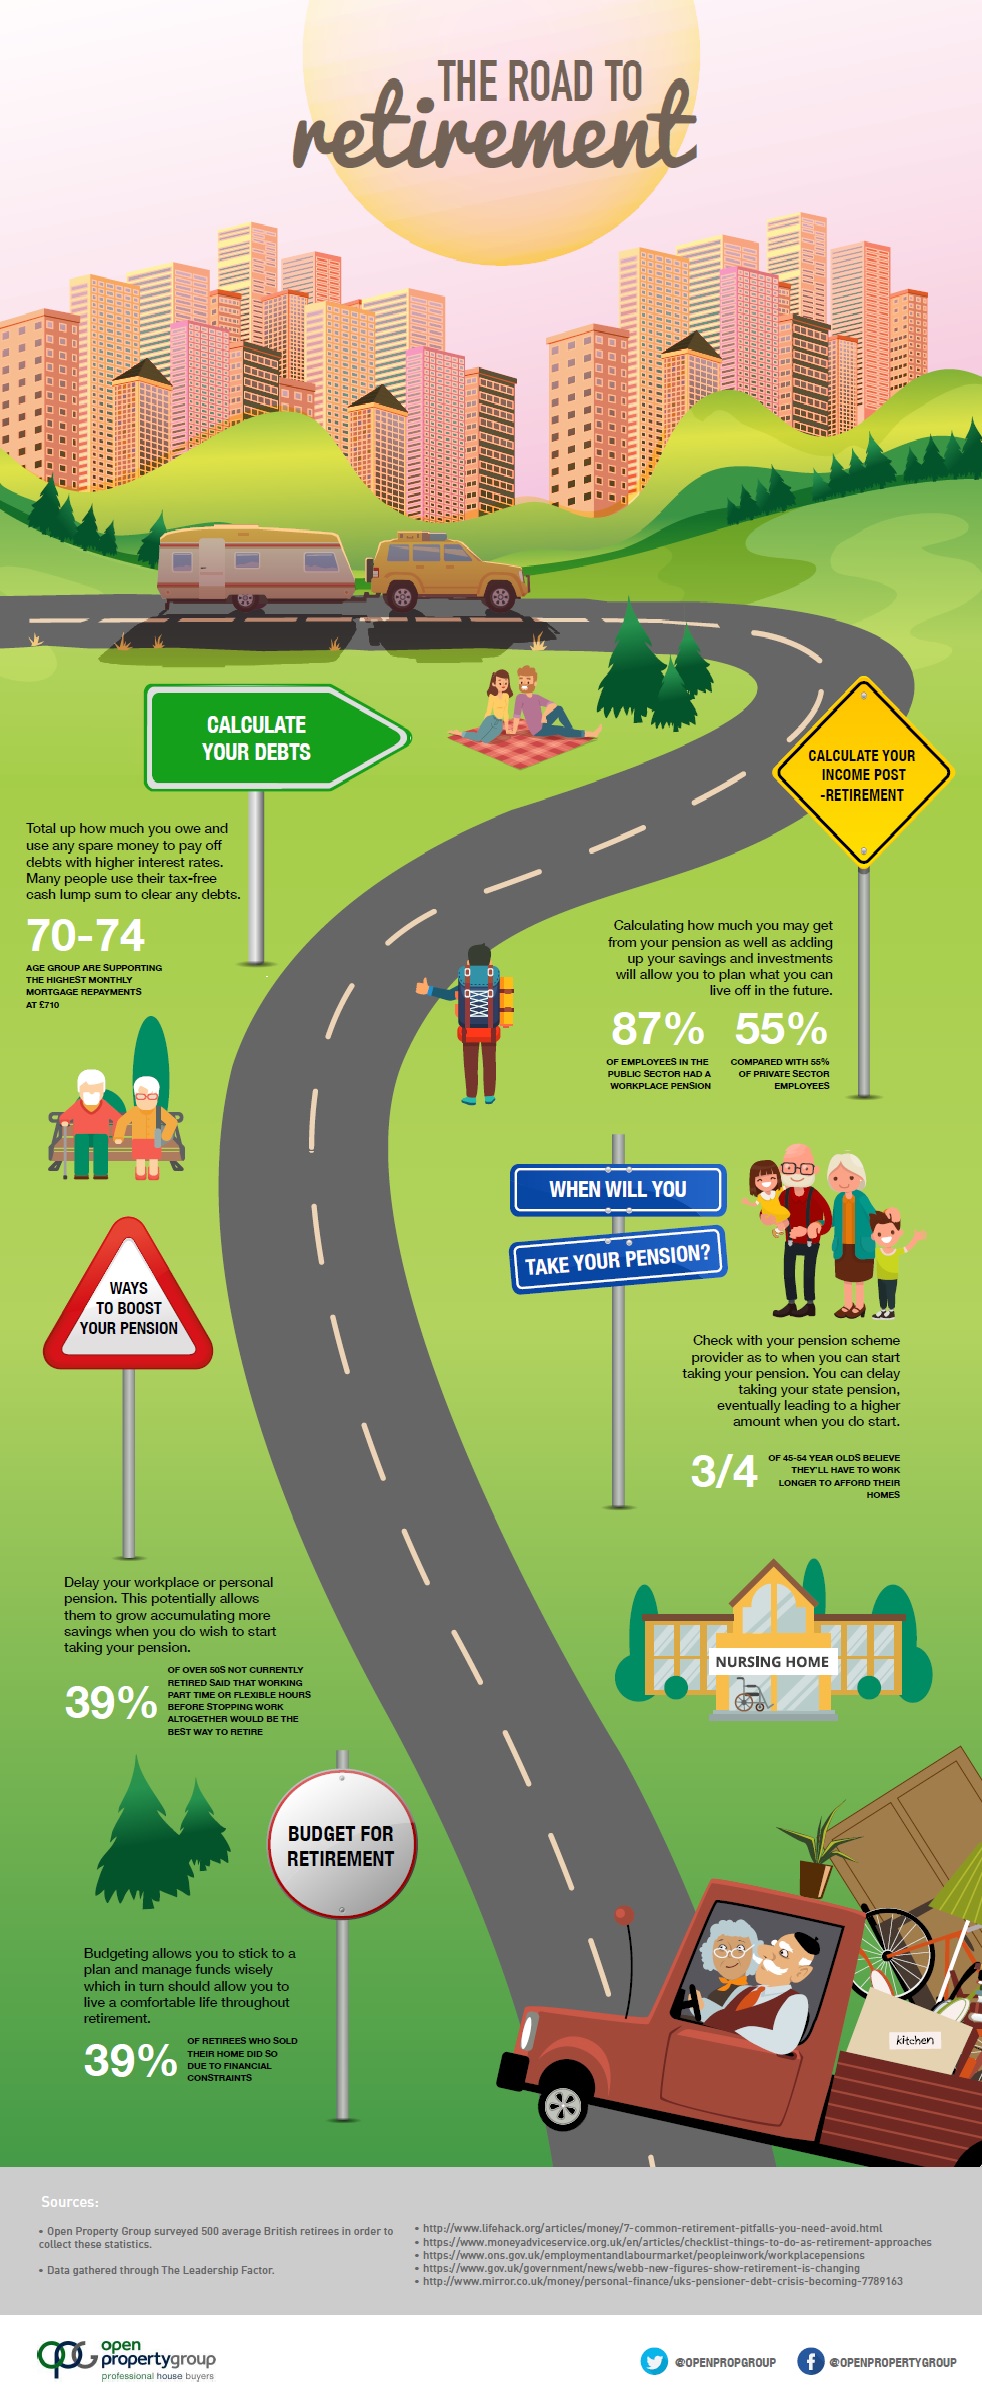 Road to Retirement infographic